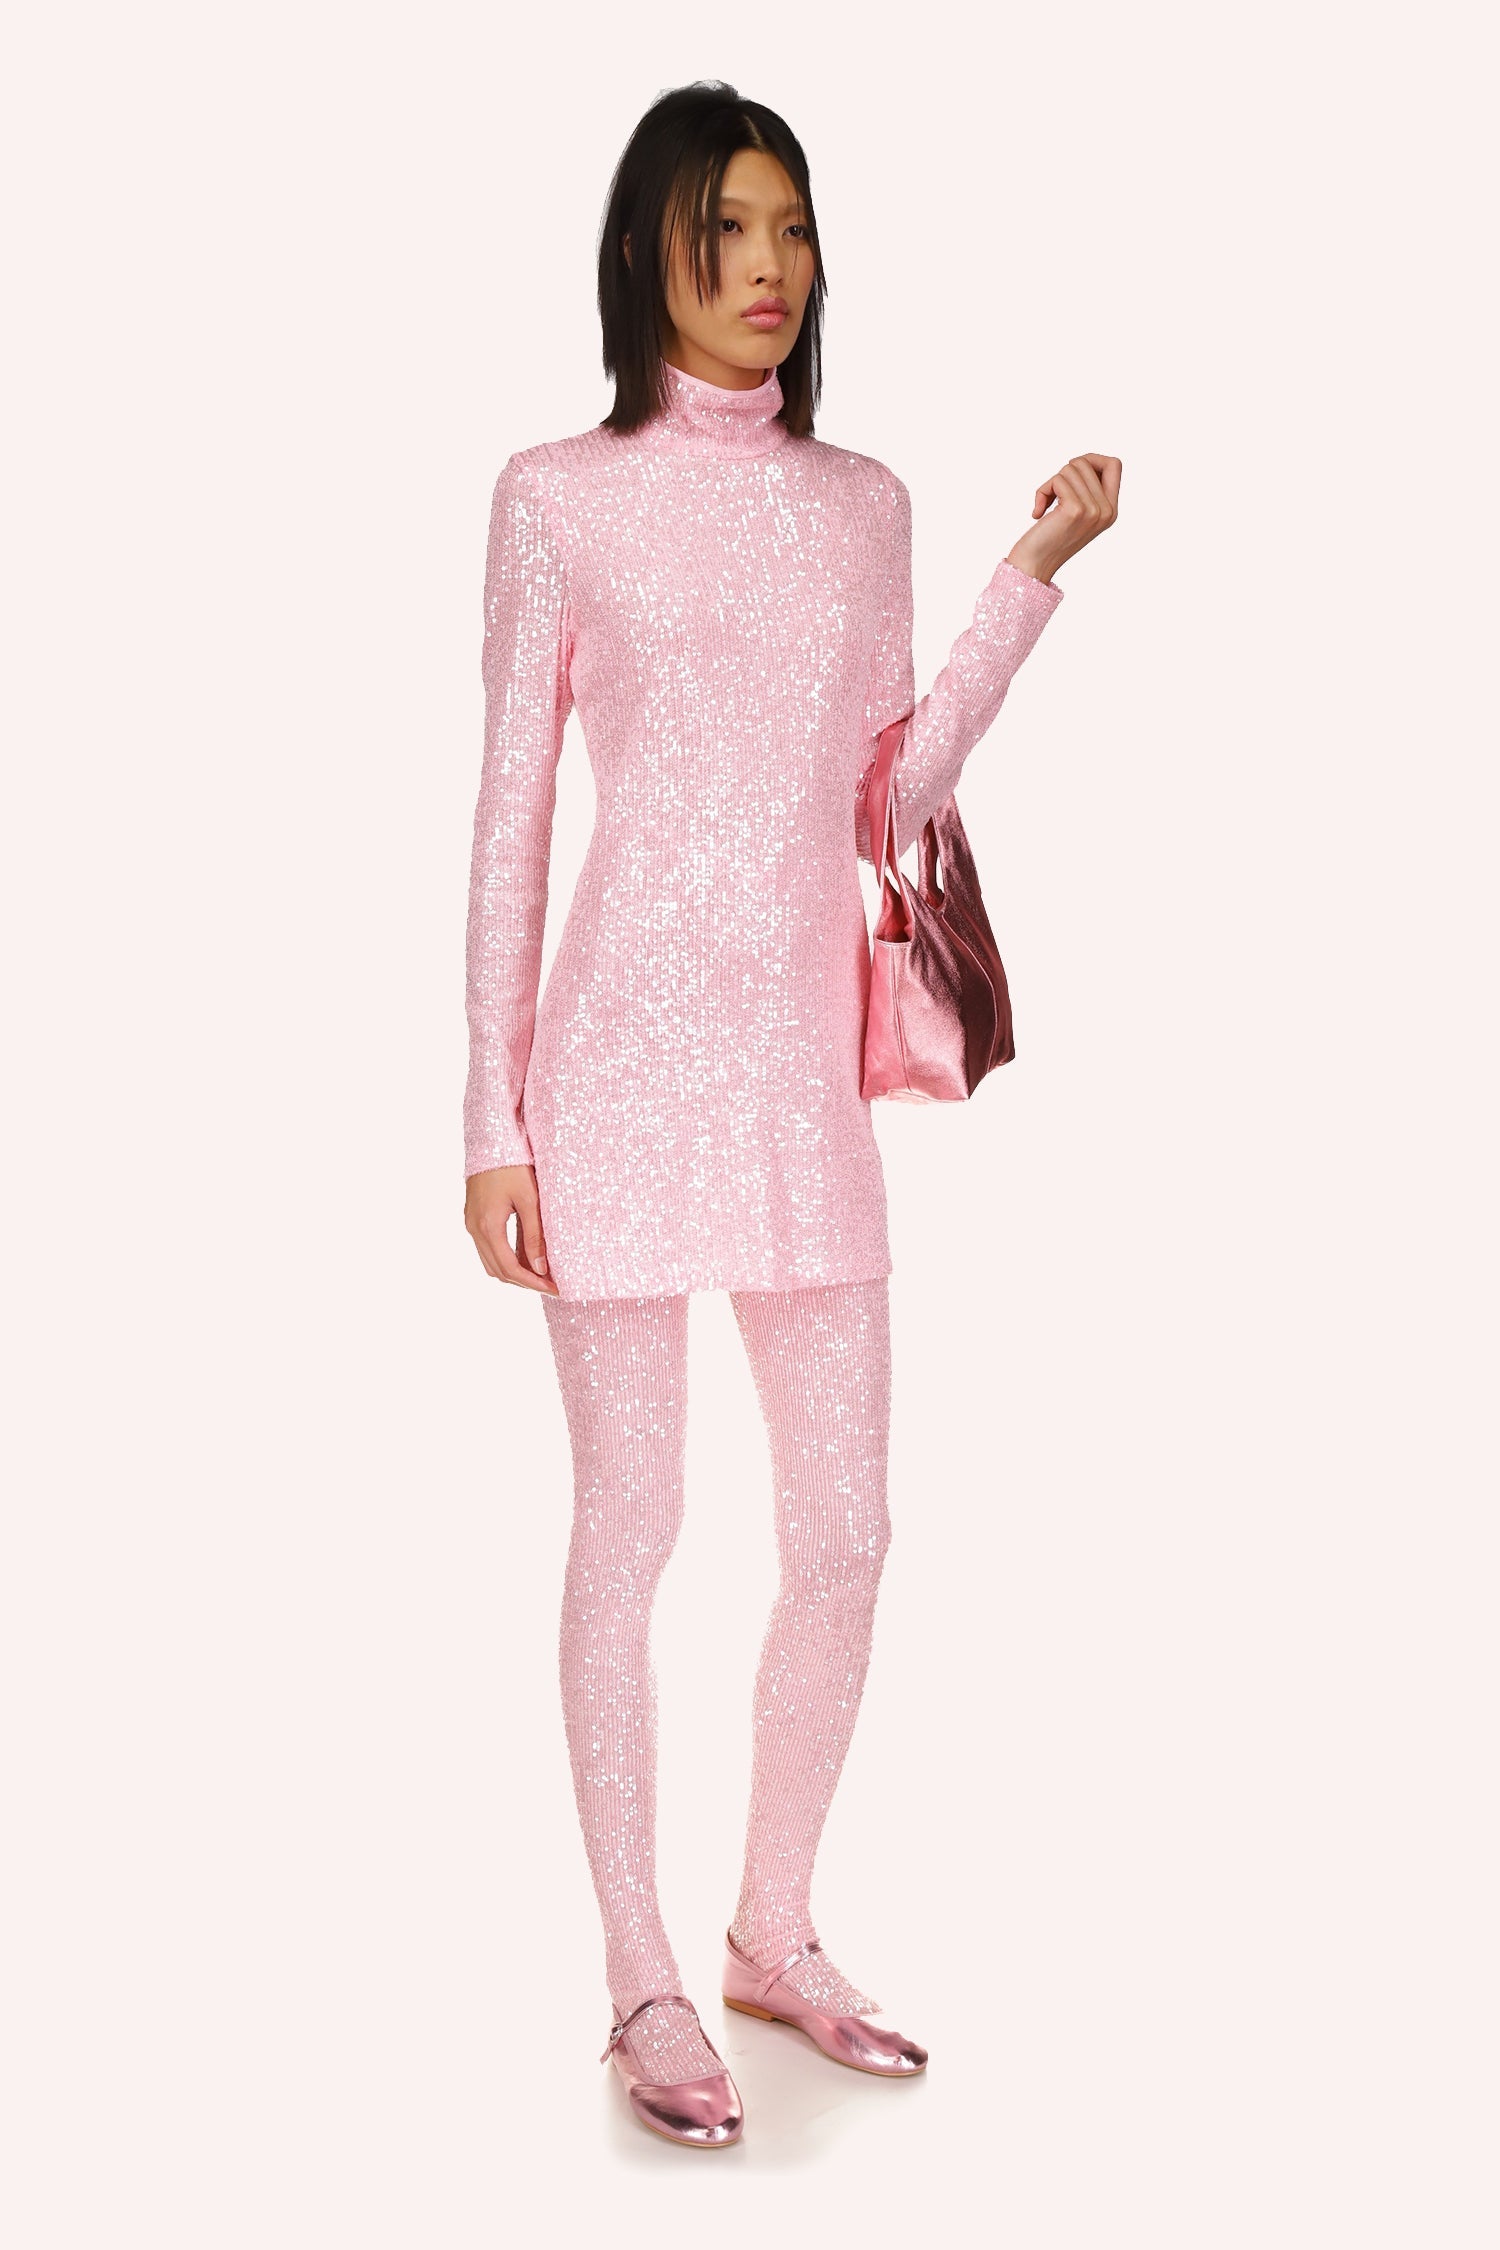 The Turtleneck Dress, offers an elegant and refined look in a delicate baby pink hue, long sleeves, turtle neckline collar